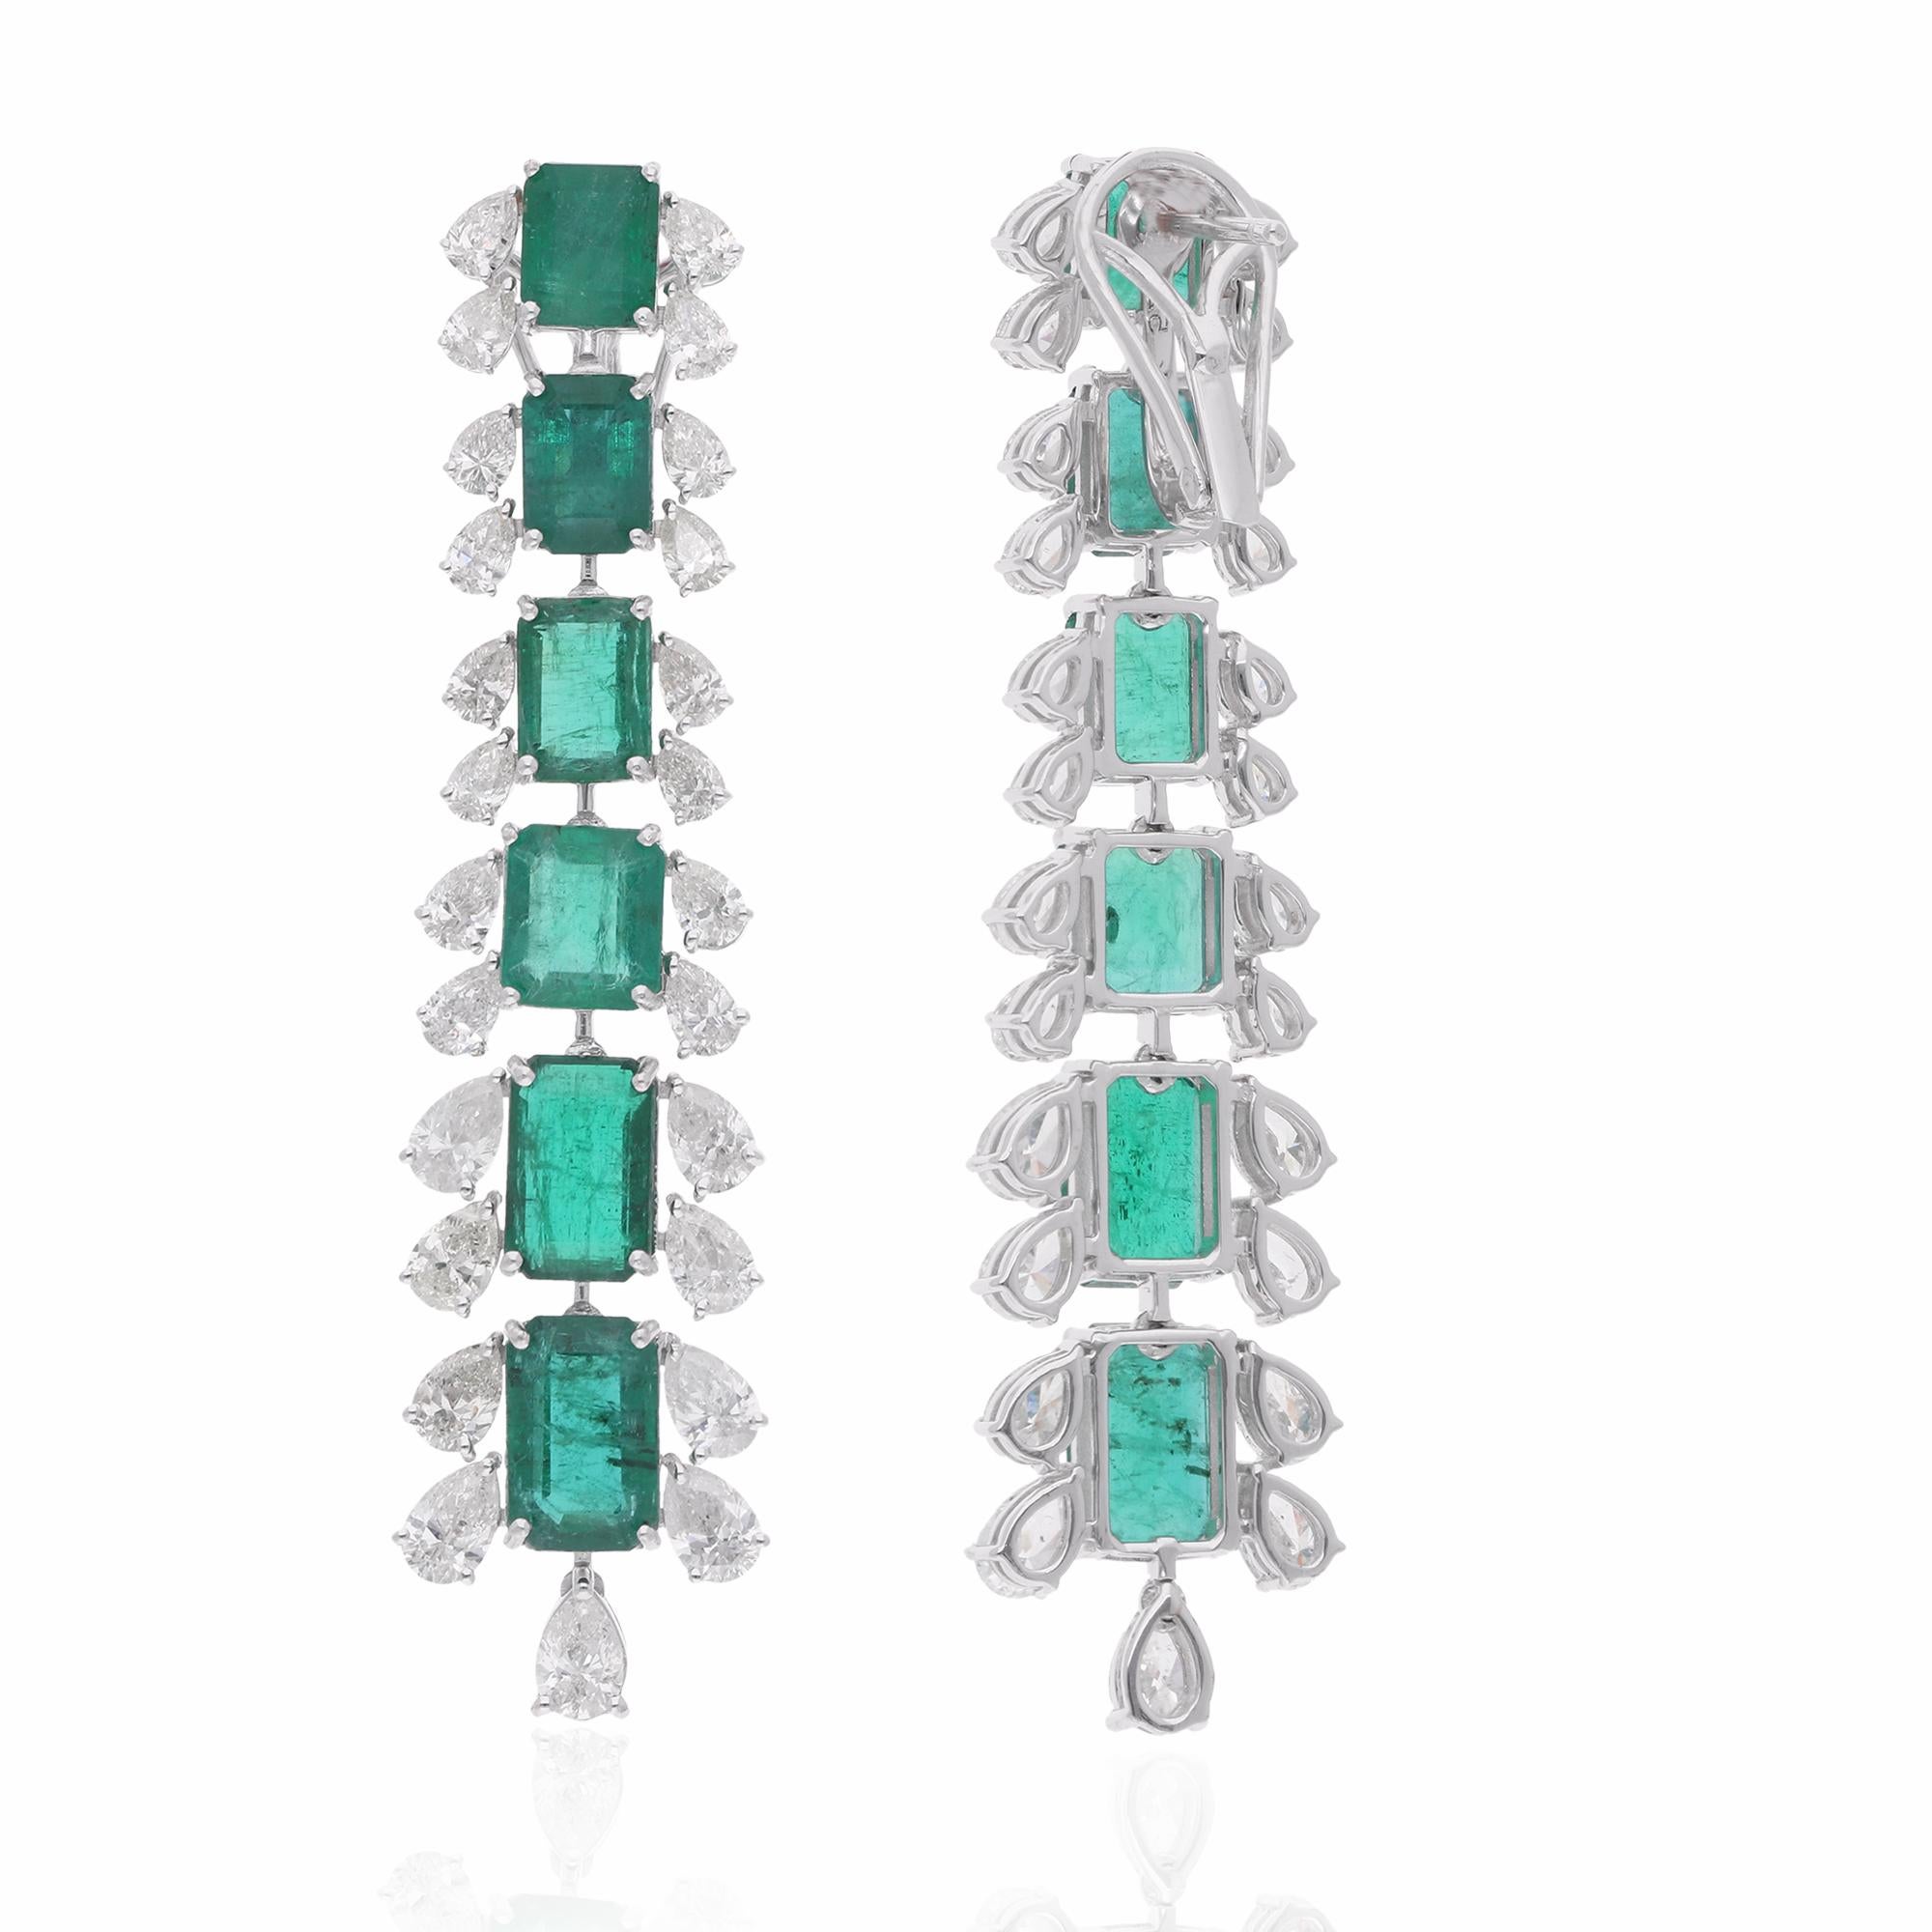 Indulge in the luxurious allure of these exquisite Natural Zambian Emerald Gemstone Dangle Earrings, adorned with dazzling Diamonds and set in lustrous 14k White Gold. Crafted with meticulous attention to detail, these earrings radiate elegance and